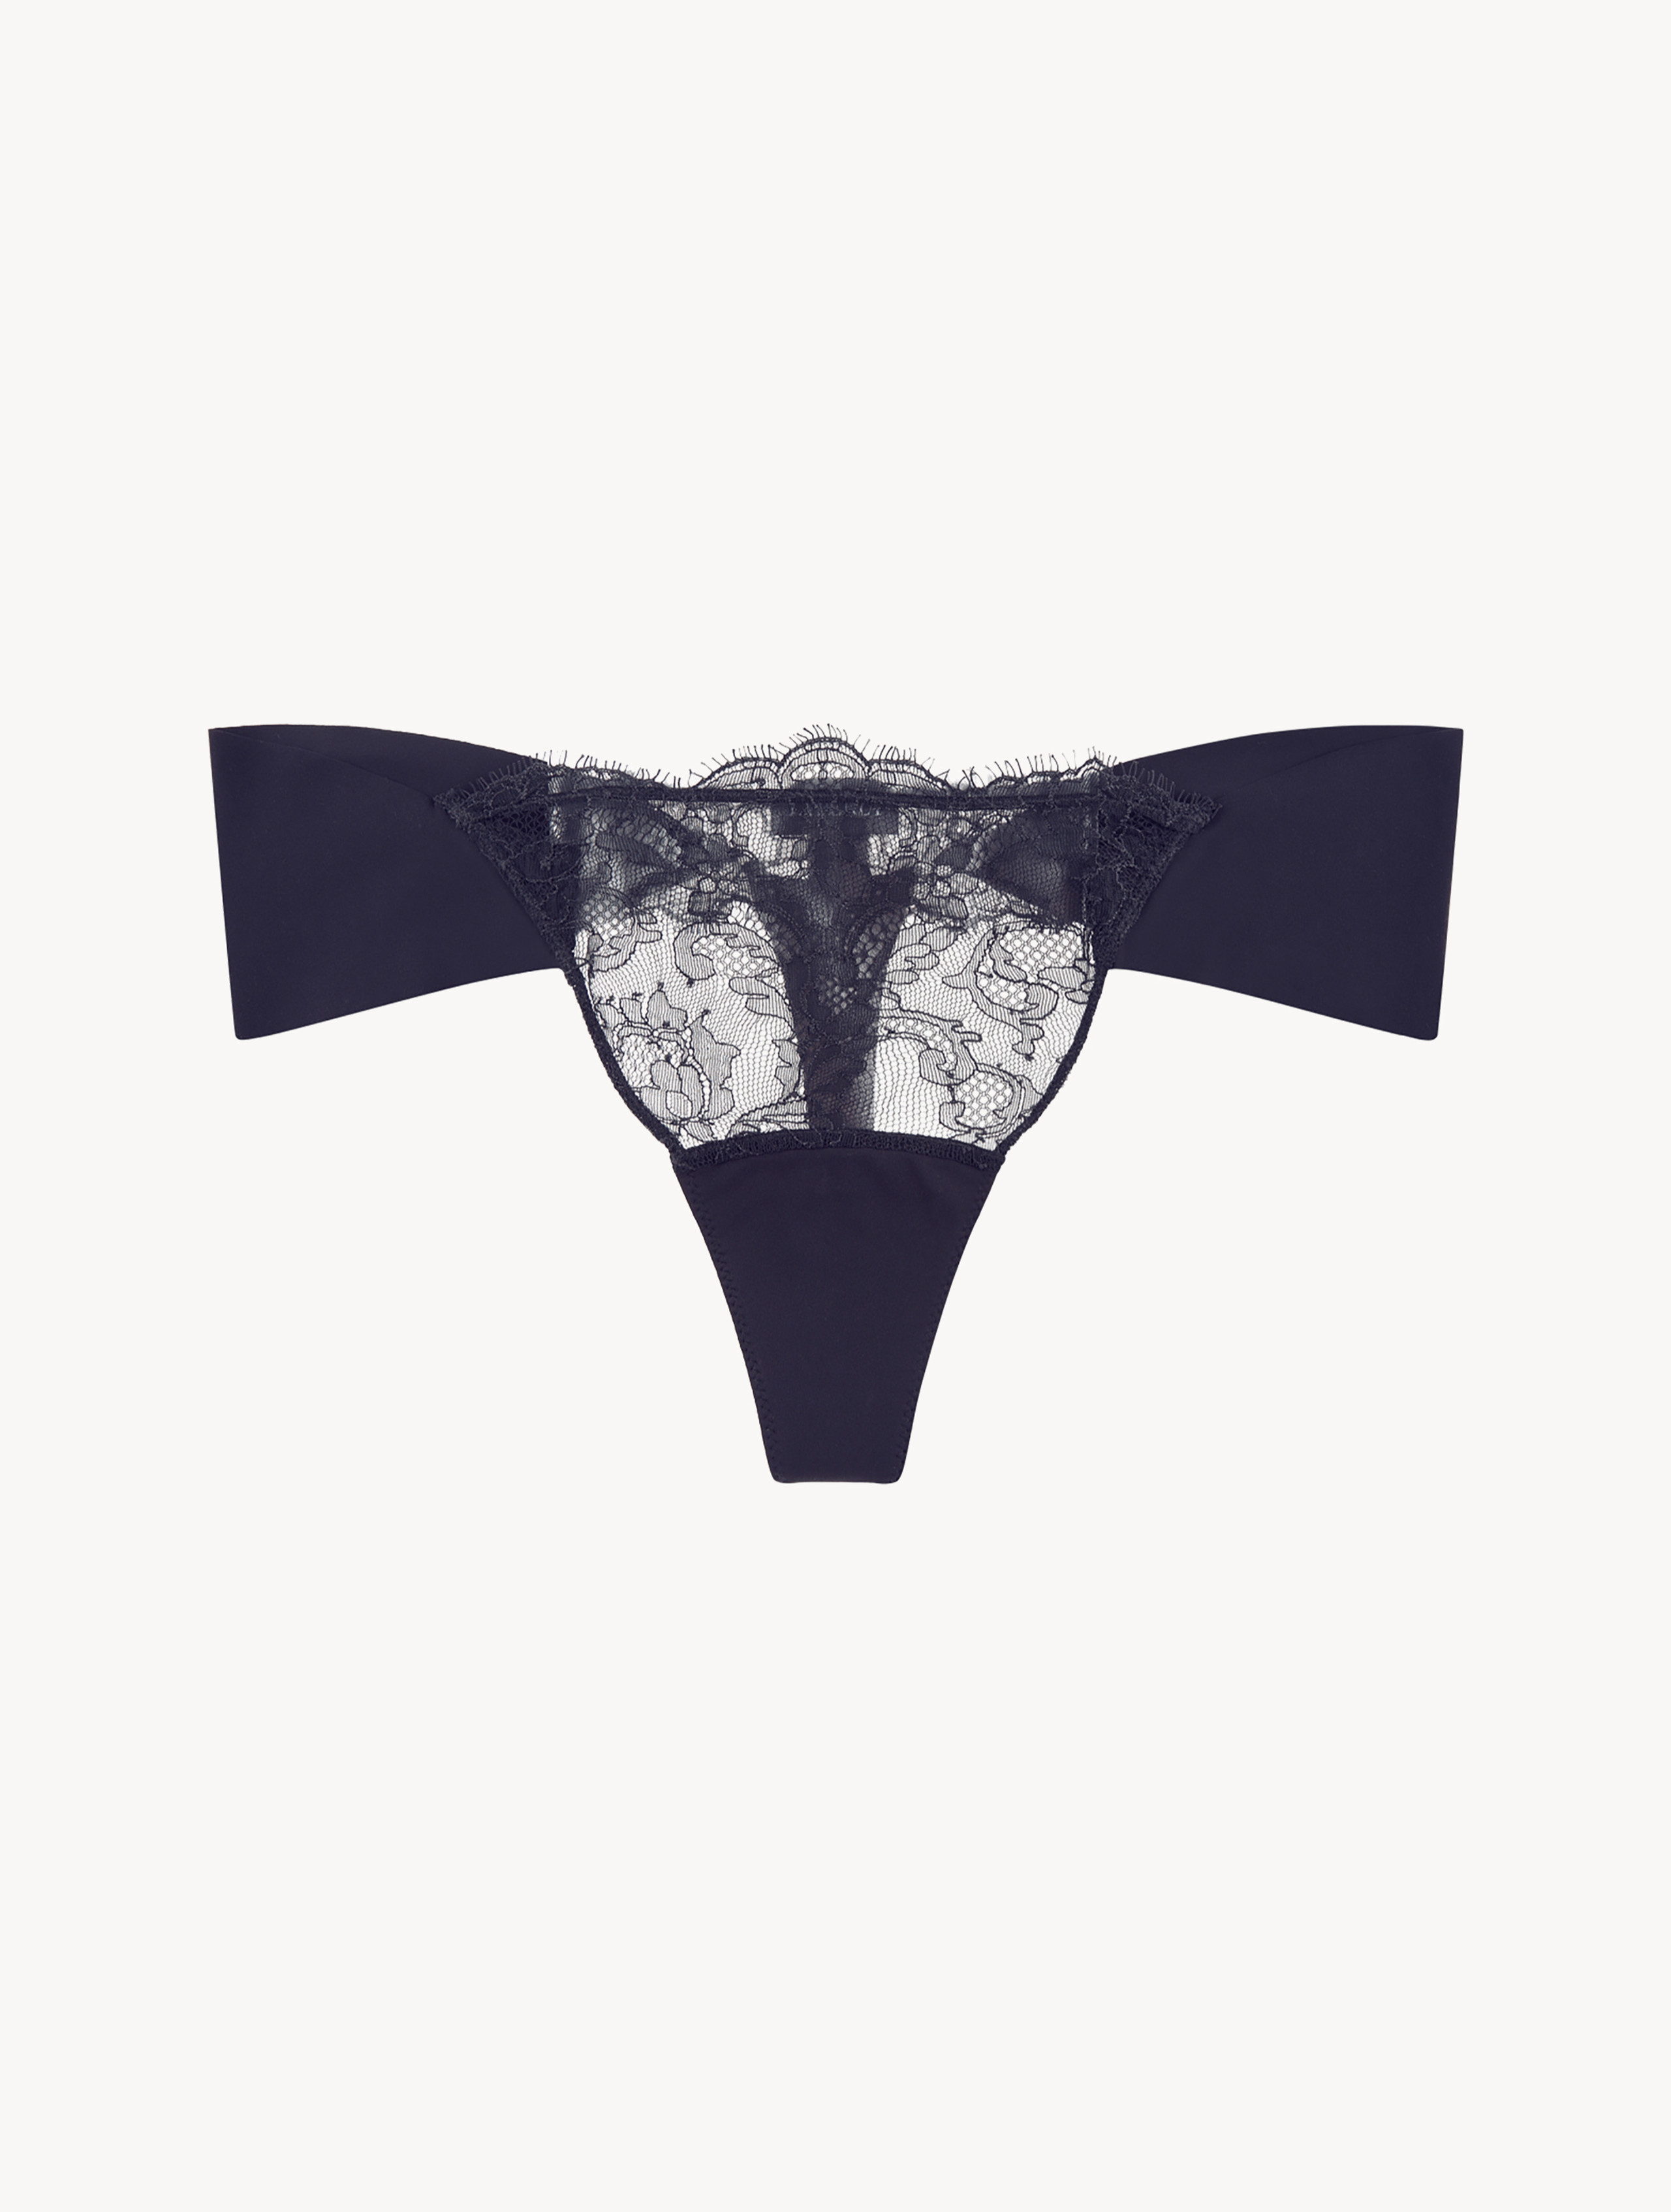 Luxury Lycra Thong in Black with Chantilly Lace | La Perla